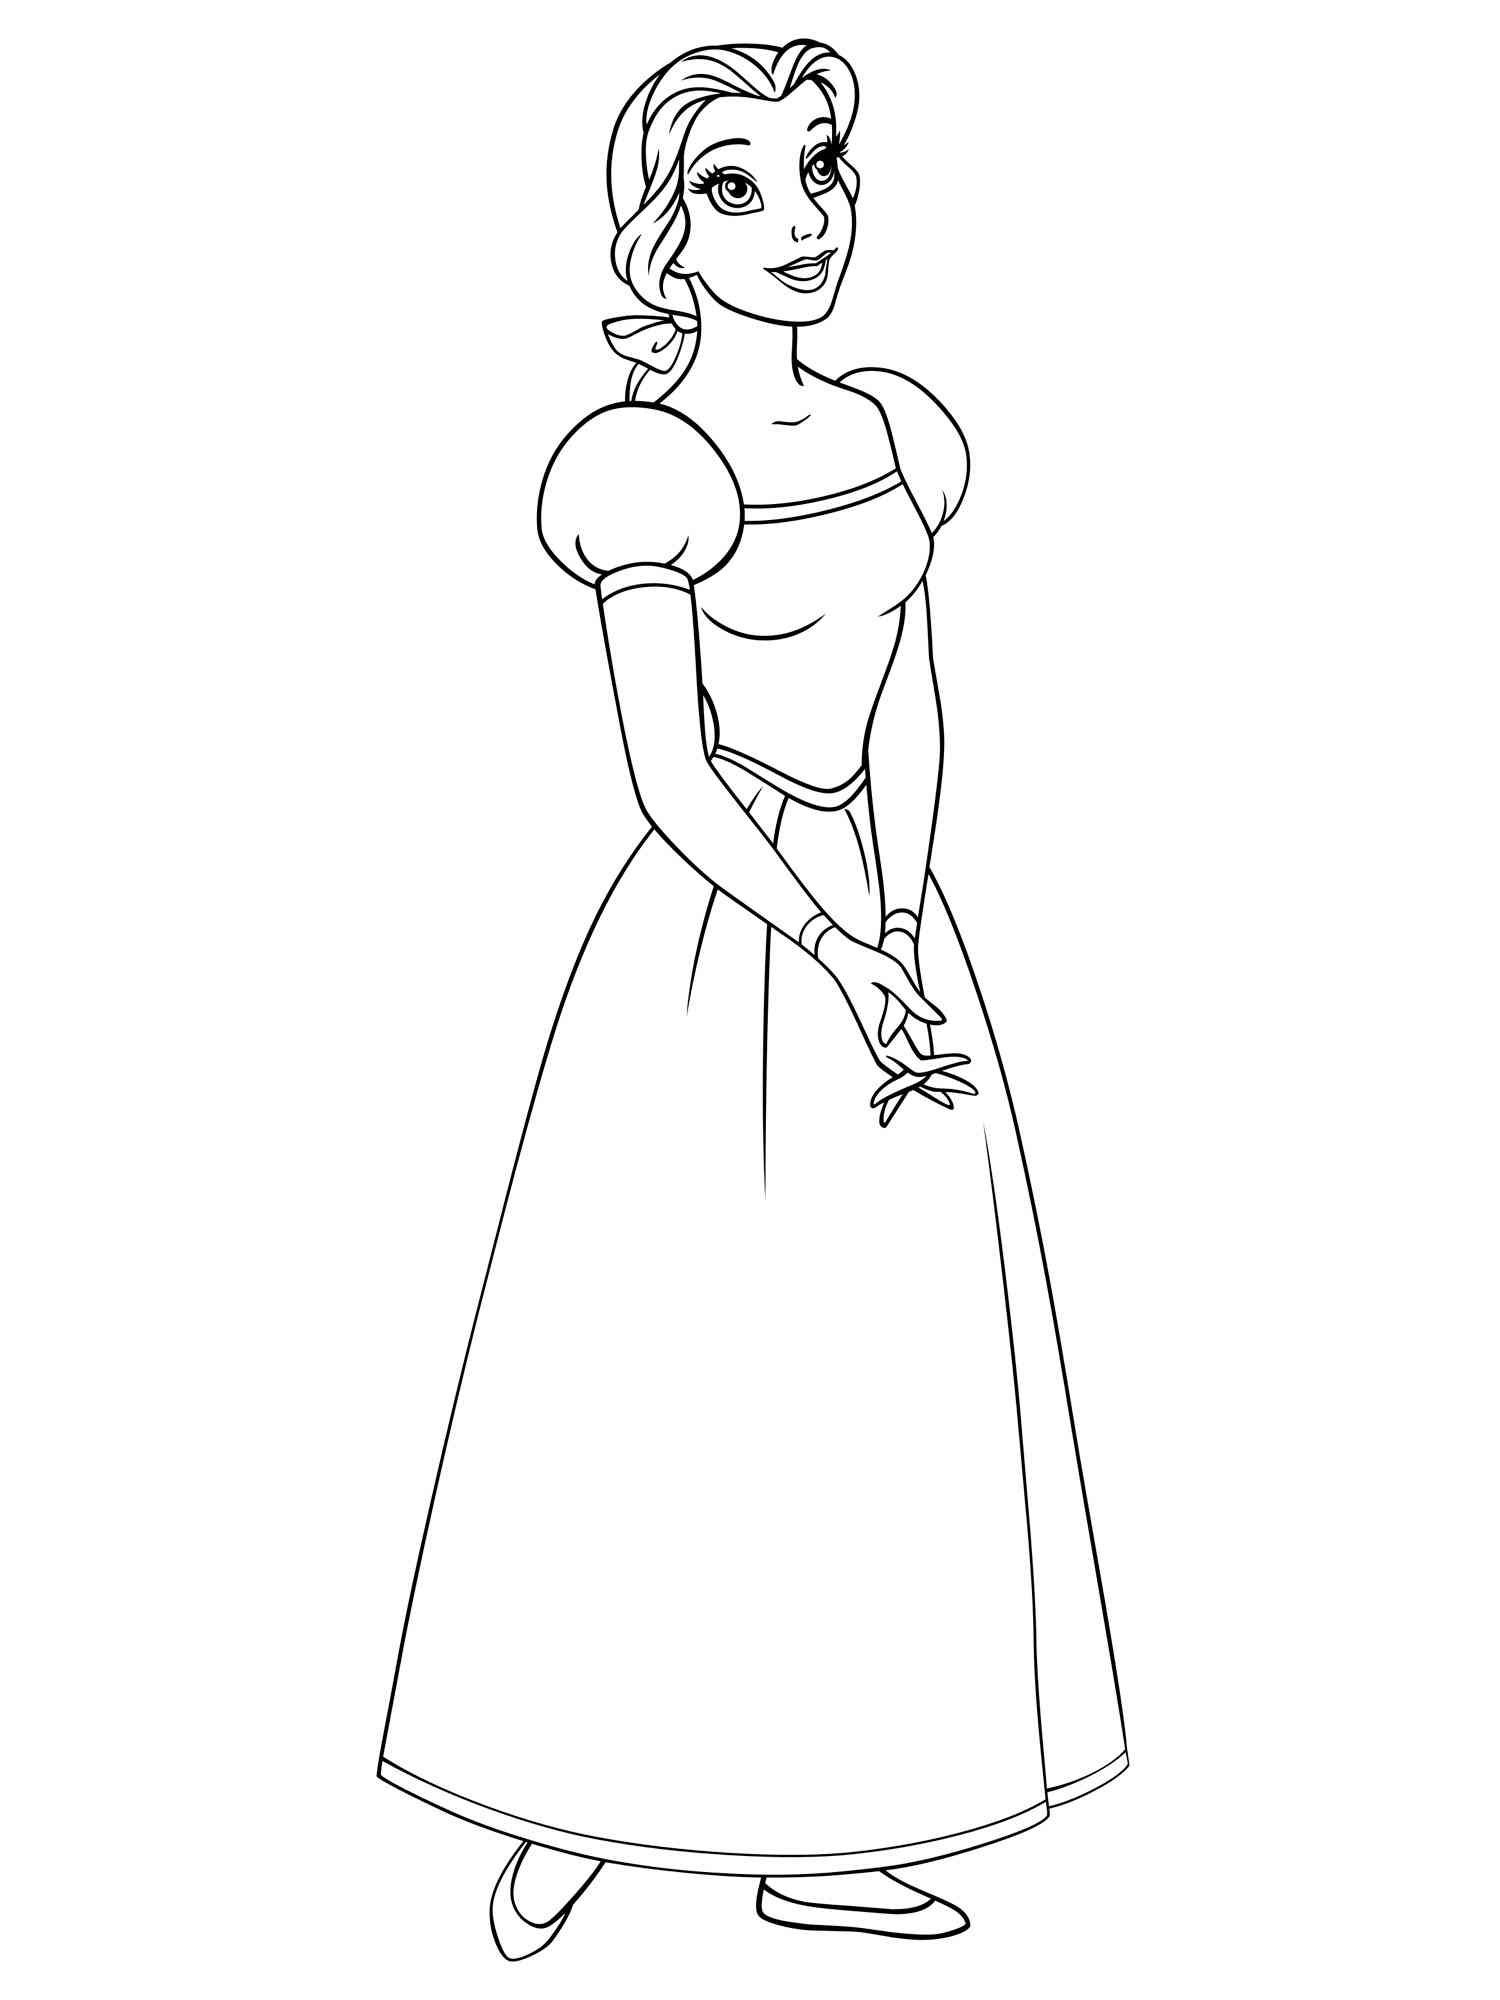 Humble Belle coloring page